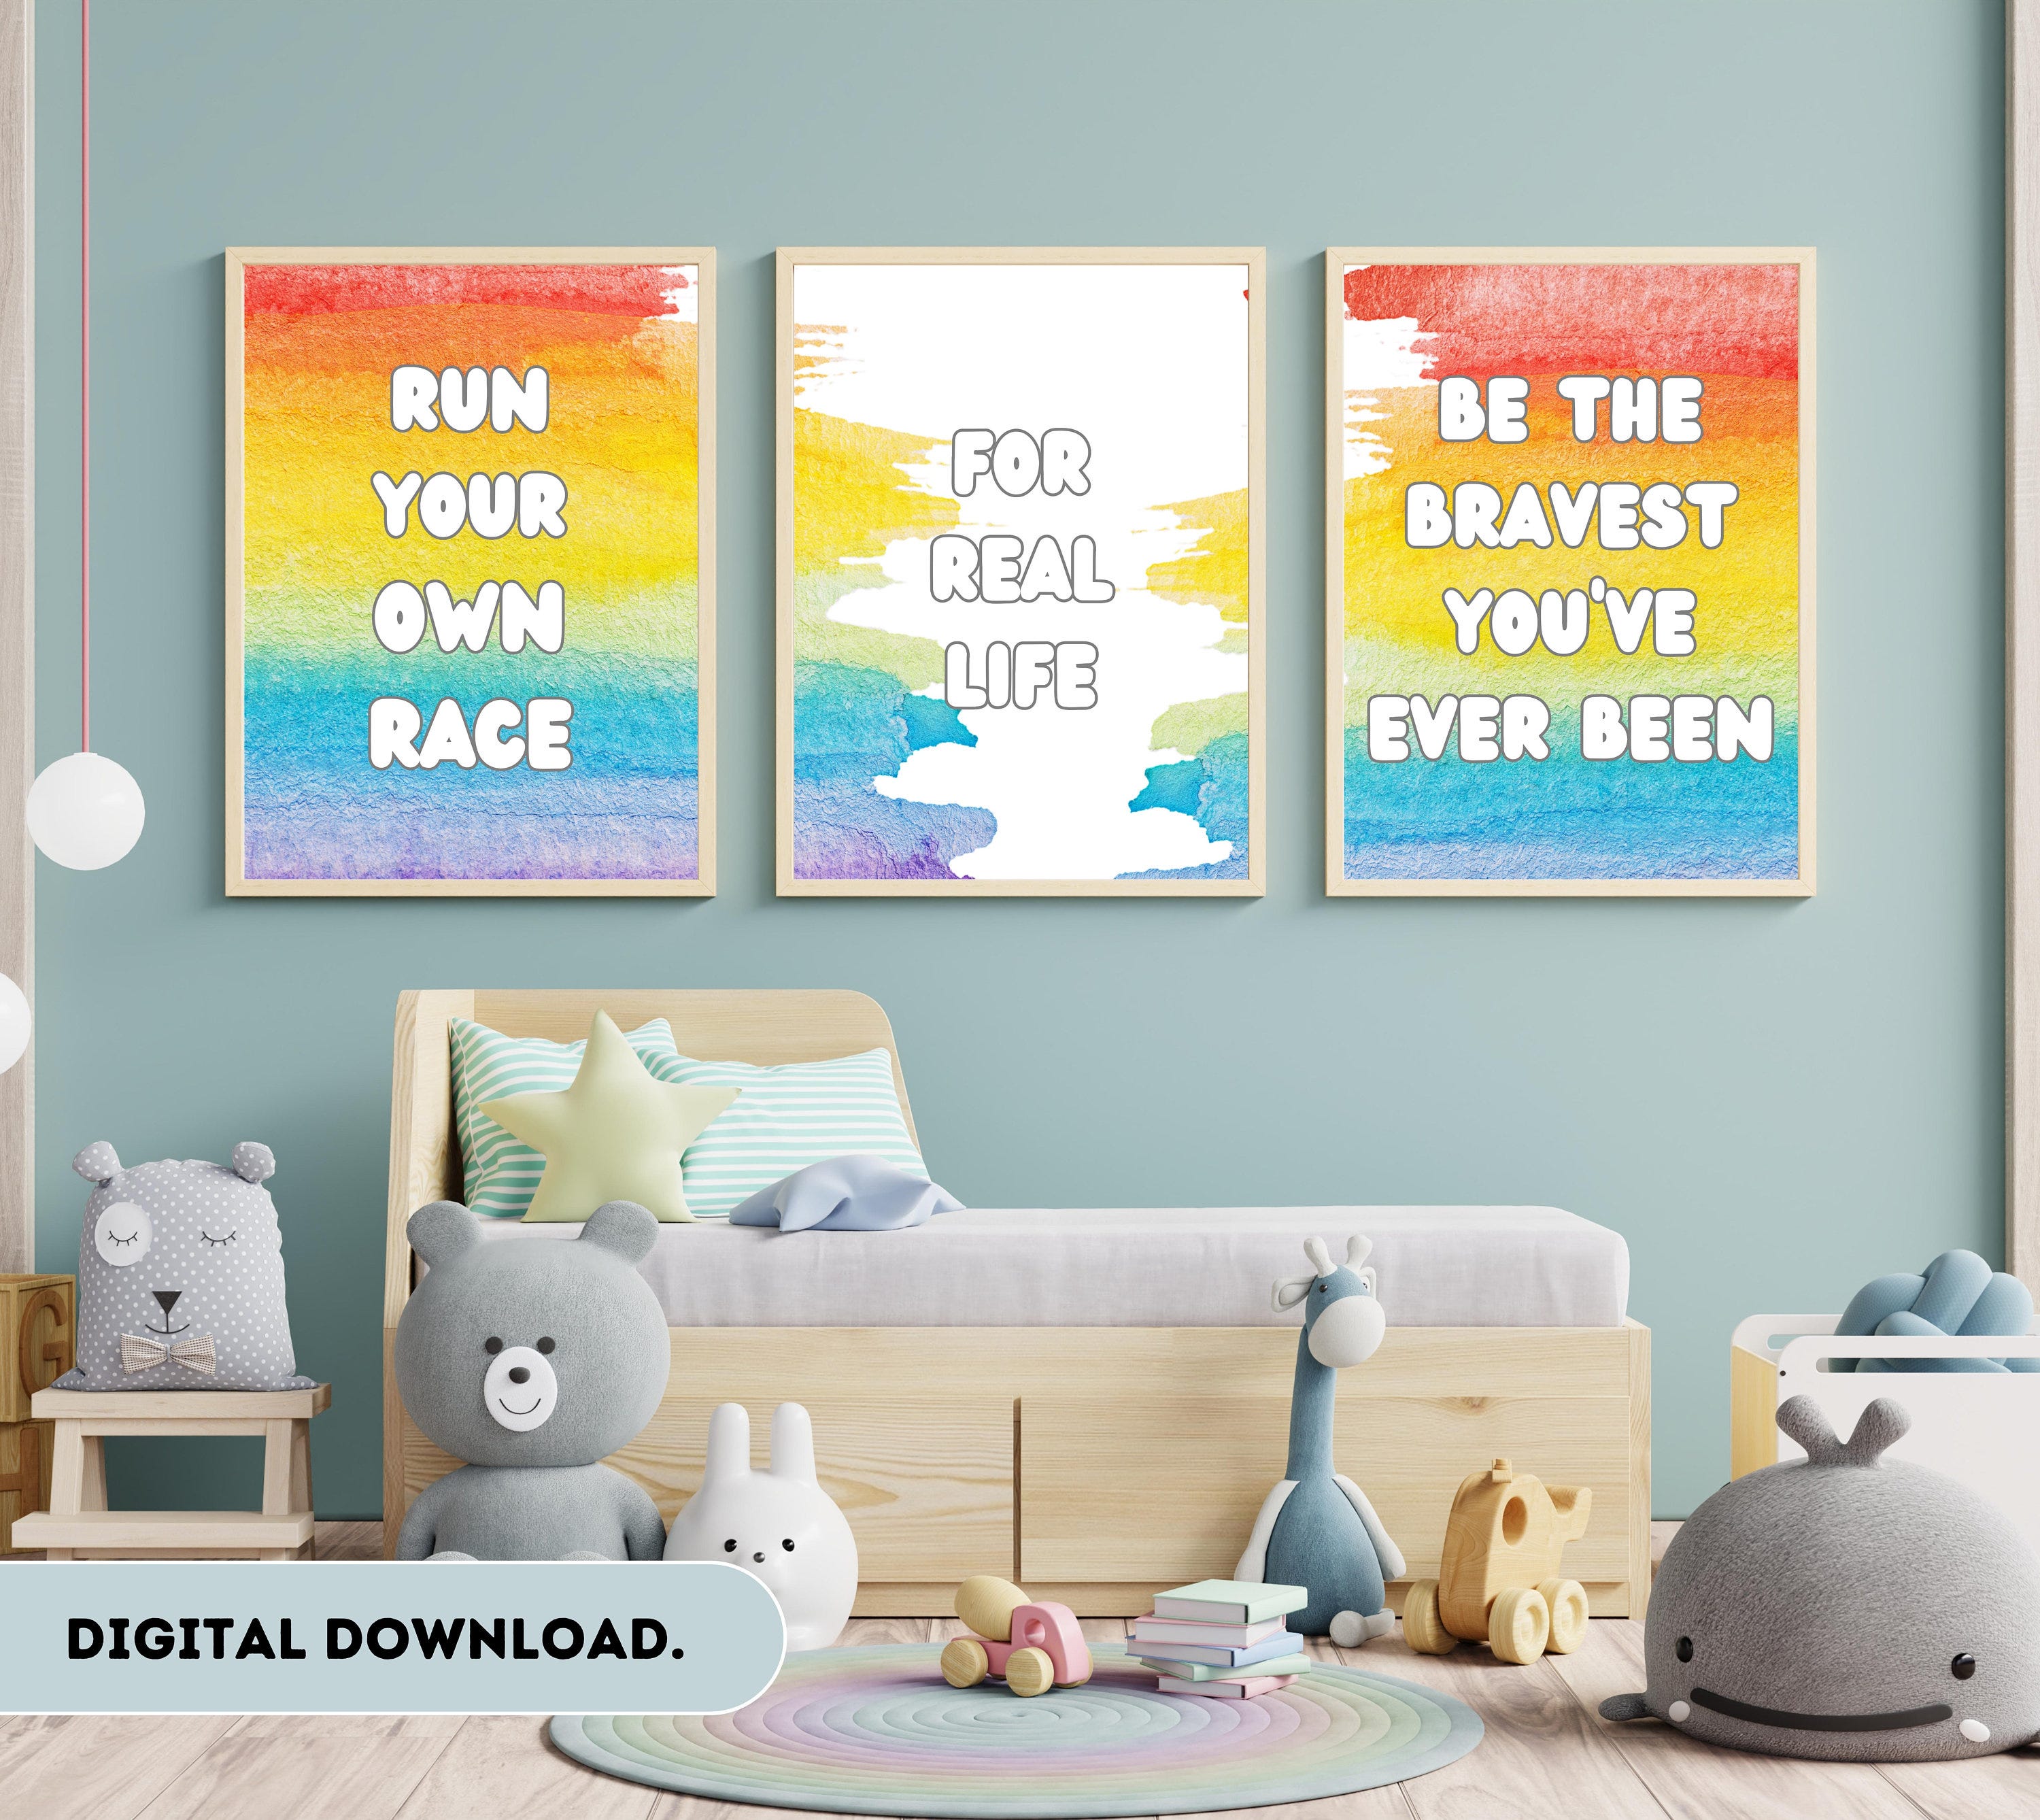 Bluey 3x Inspired Quotes on a Rainbow background - For Real Life, Run your own race, Bravest you